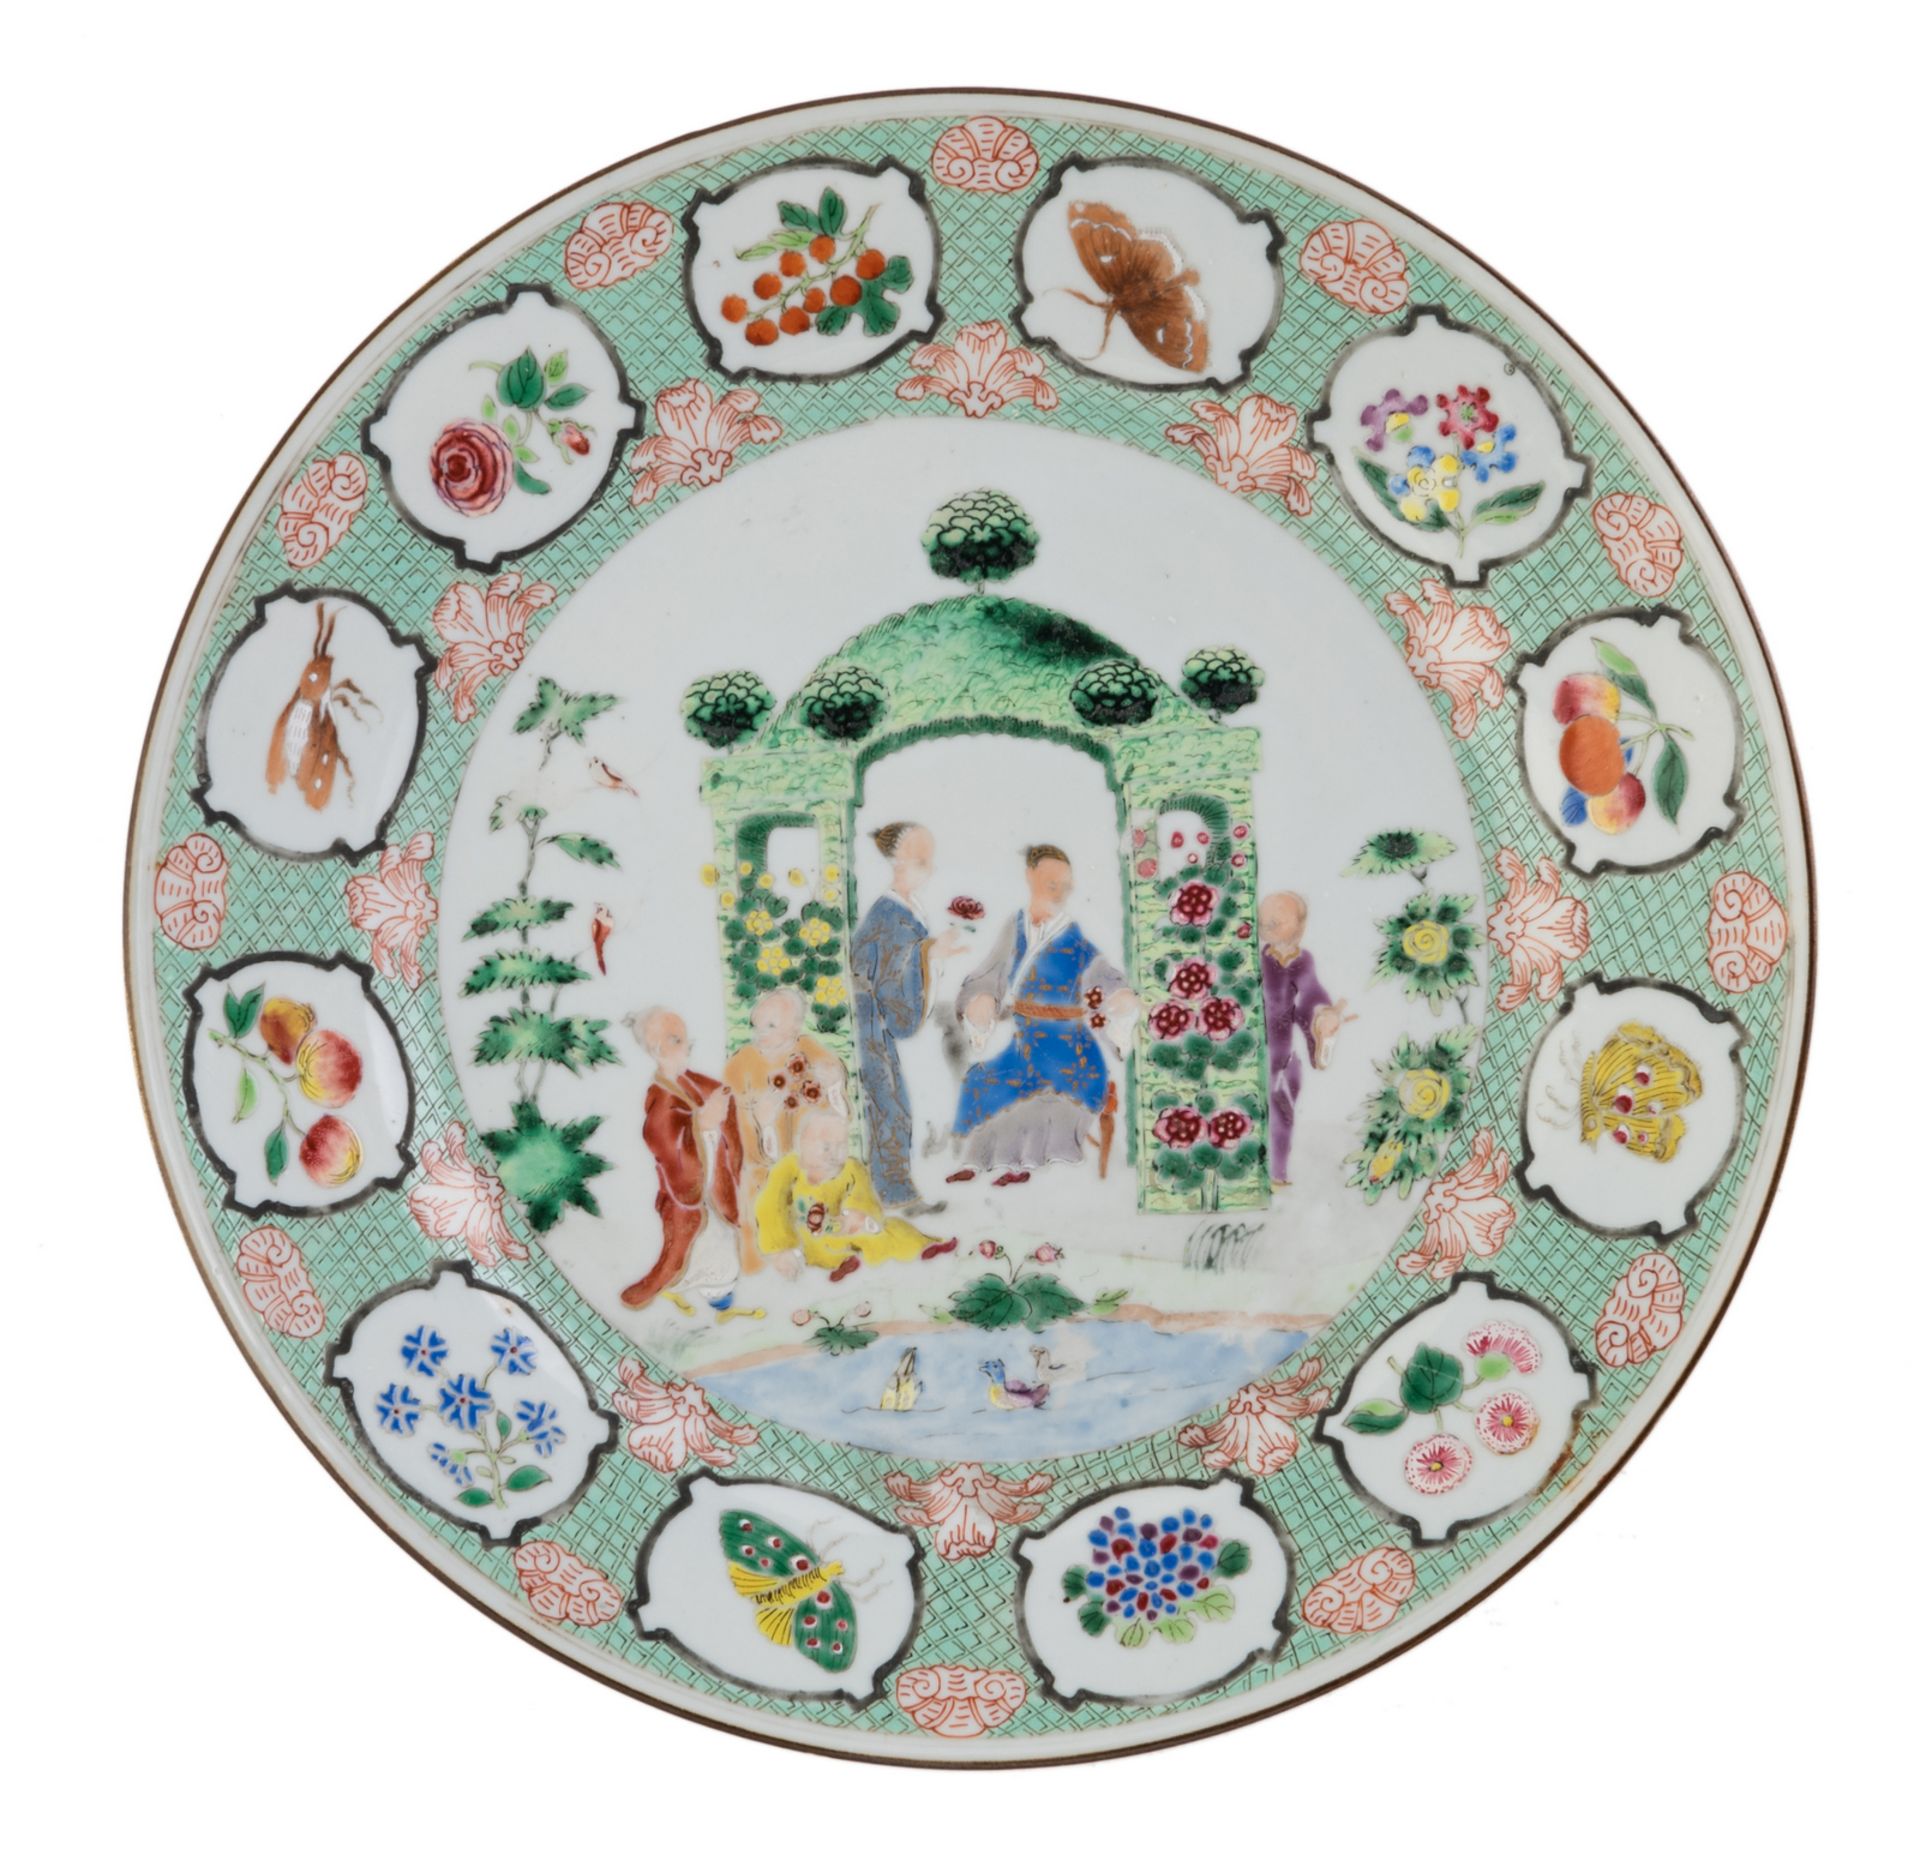 A Chinese famille rose export porcelain dish, the well decorated with an animated scene, depicting a